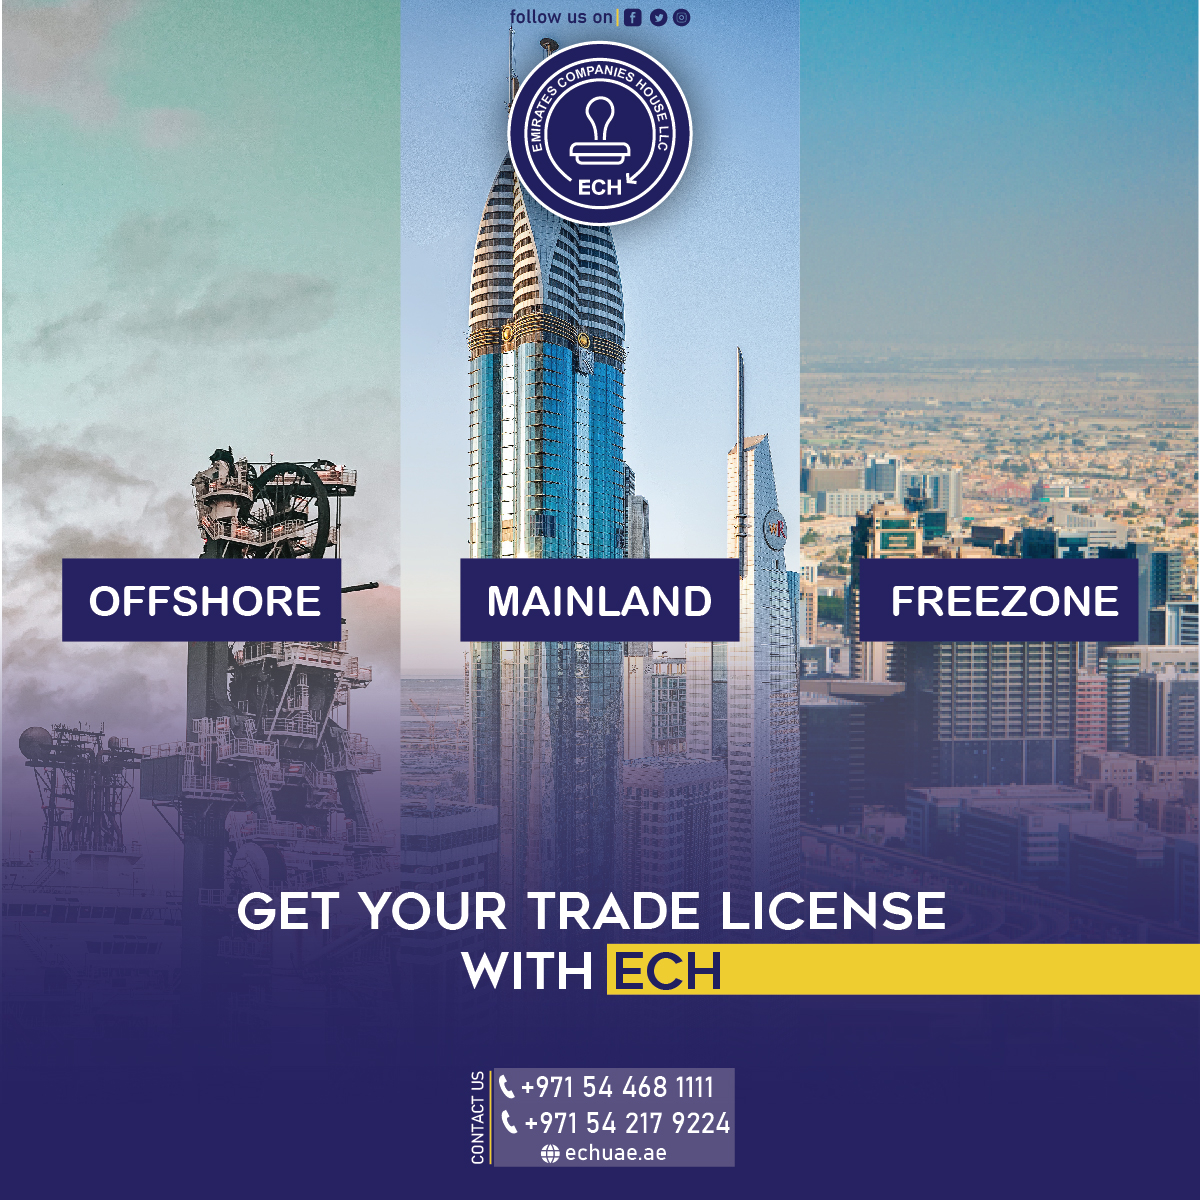 GET YOUR TRADE LICENSE
WITH ECH

'Your Gateway to all Government services'

#uaesmallbusiness #uaebusiness #uaebusinessnews #dubai #dubaismallbusiness #tradelicensedubai #tradename